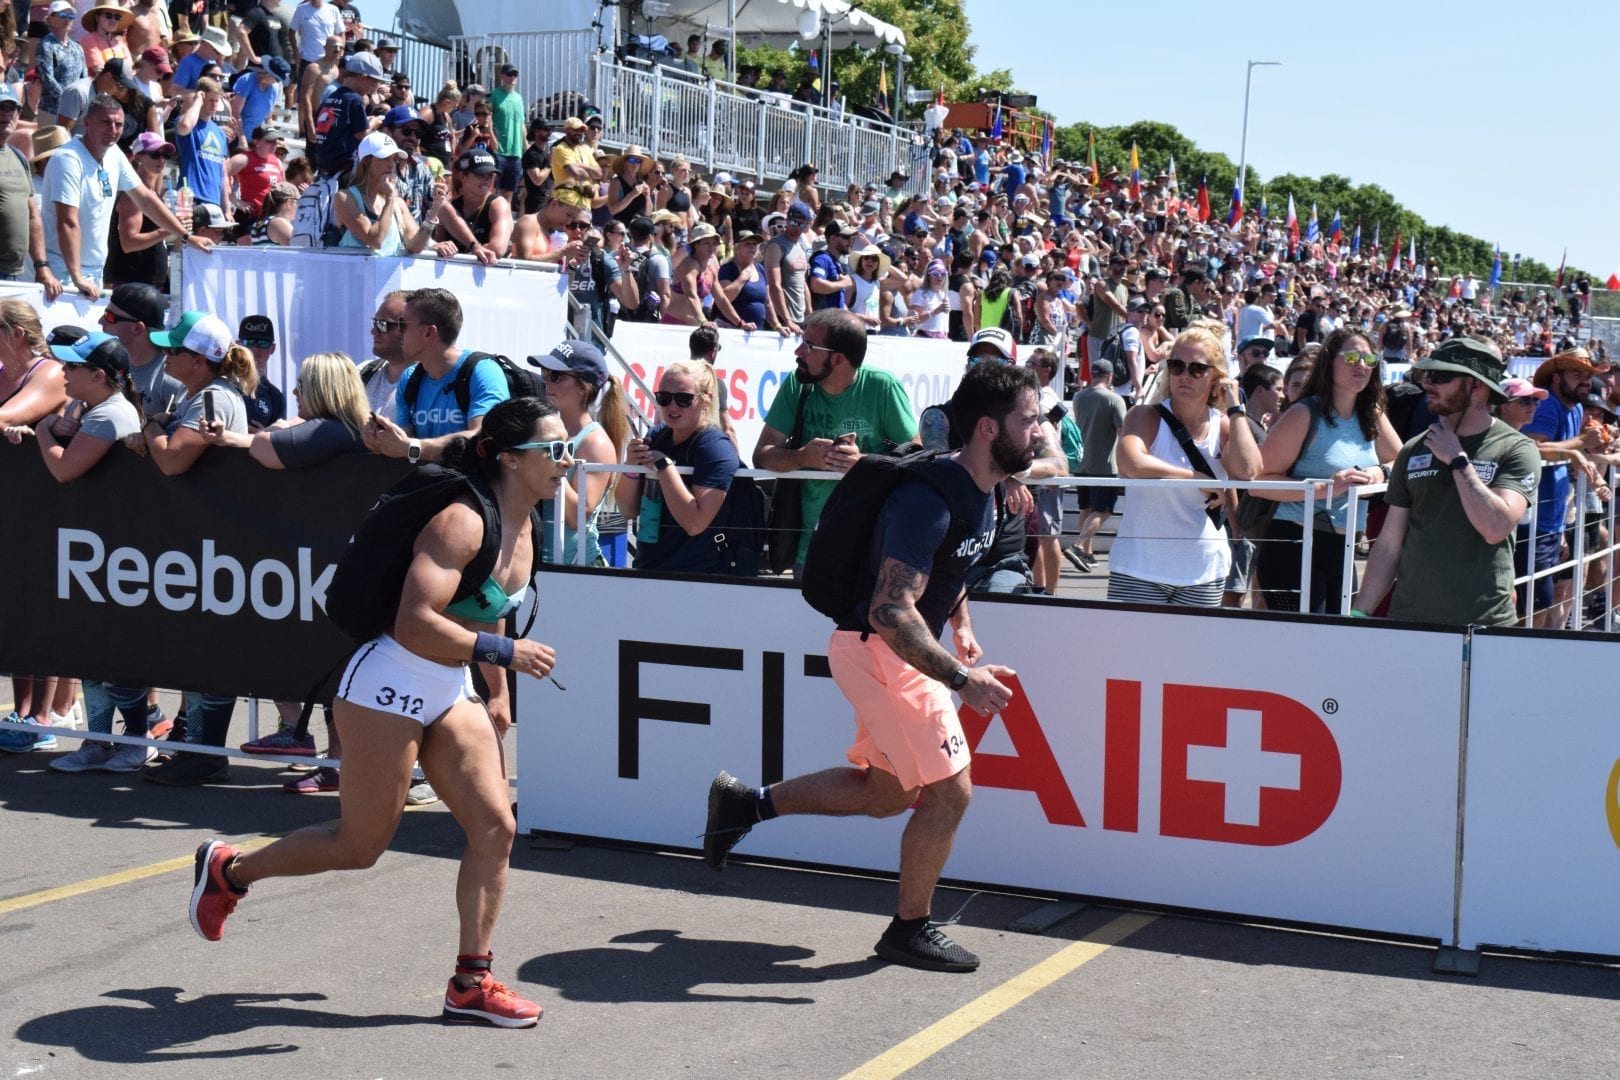 Rachel Garibay completes the Ruck Run event at the 2019 CrossFit Games